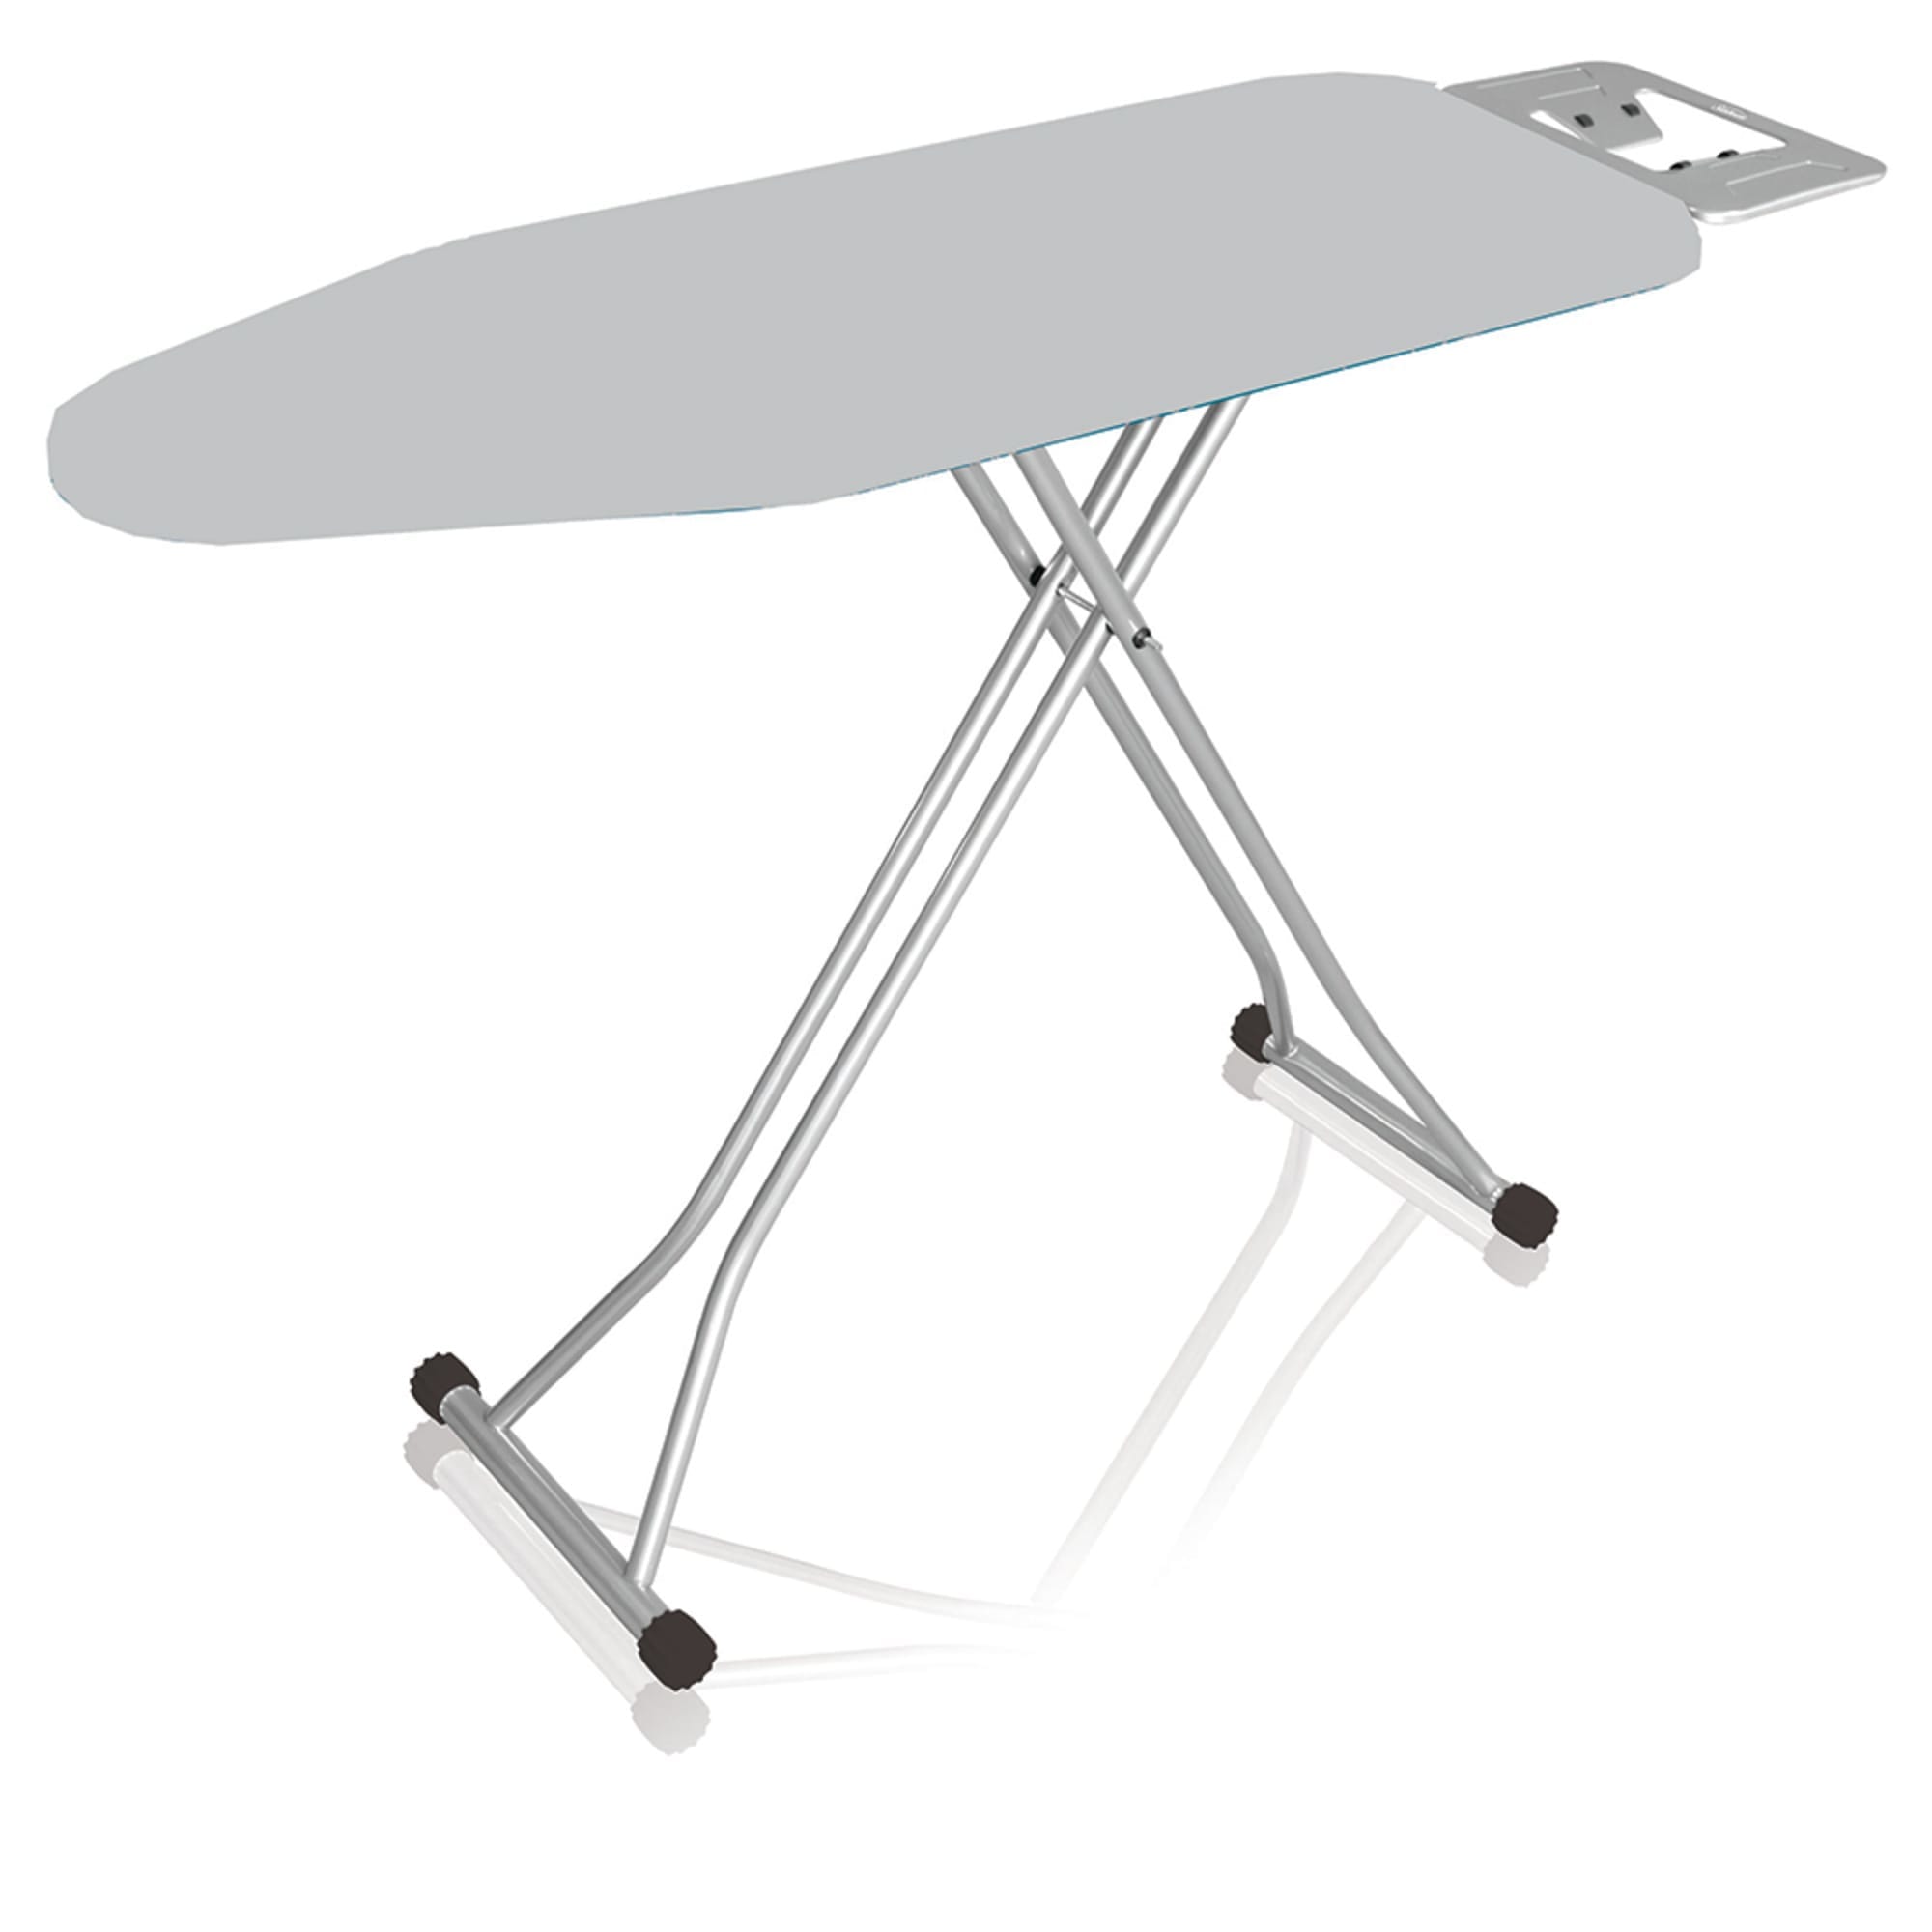 Home Basics  Ironing Board with Rest $30.00 EACH, CASE PACK OF 4